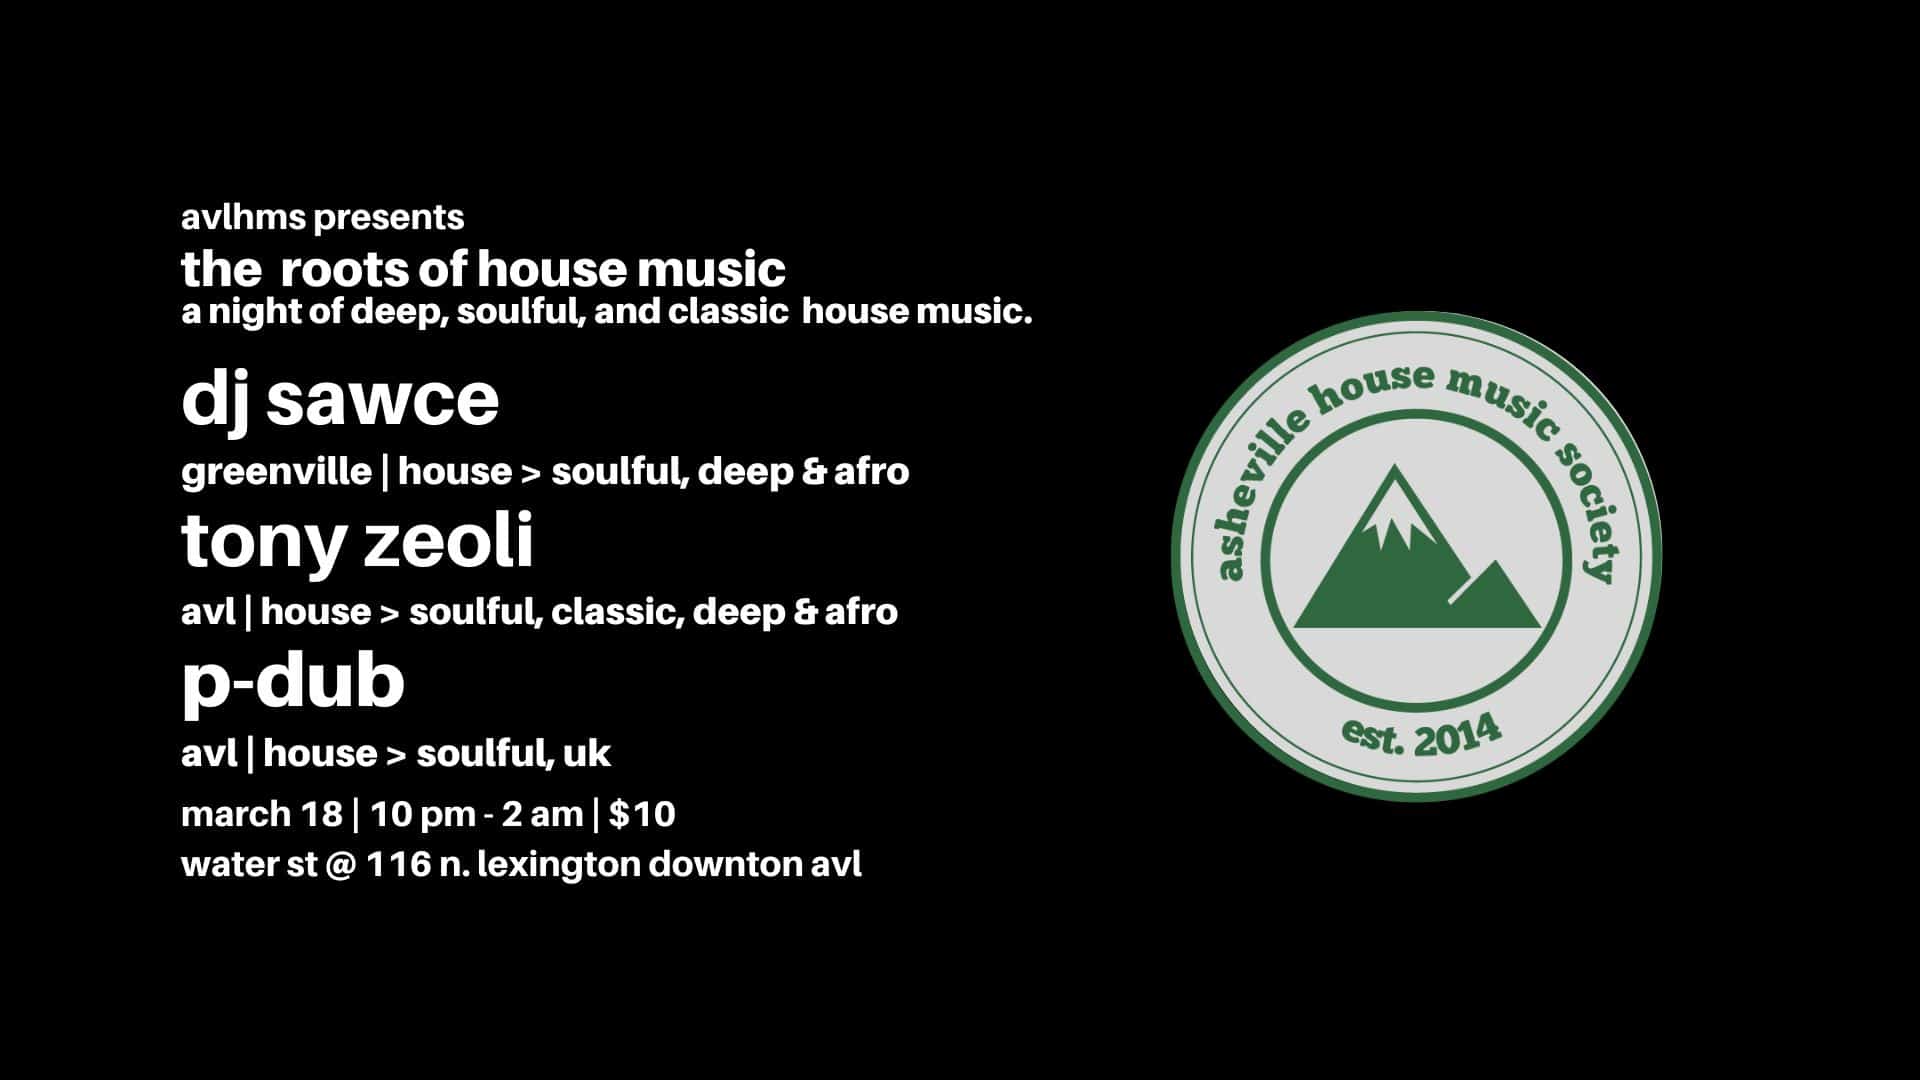 AVLHMS presents The Roots of House Music